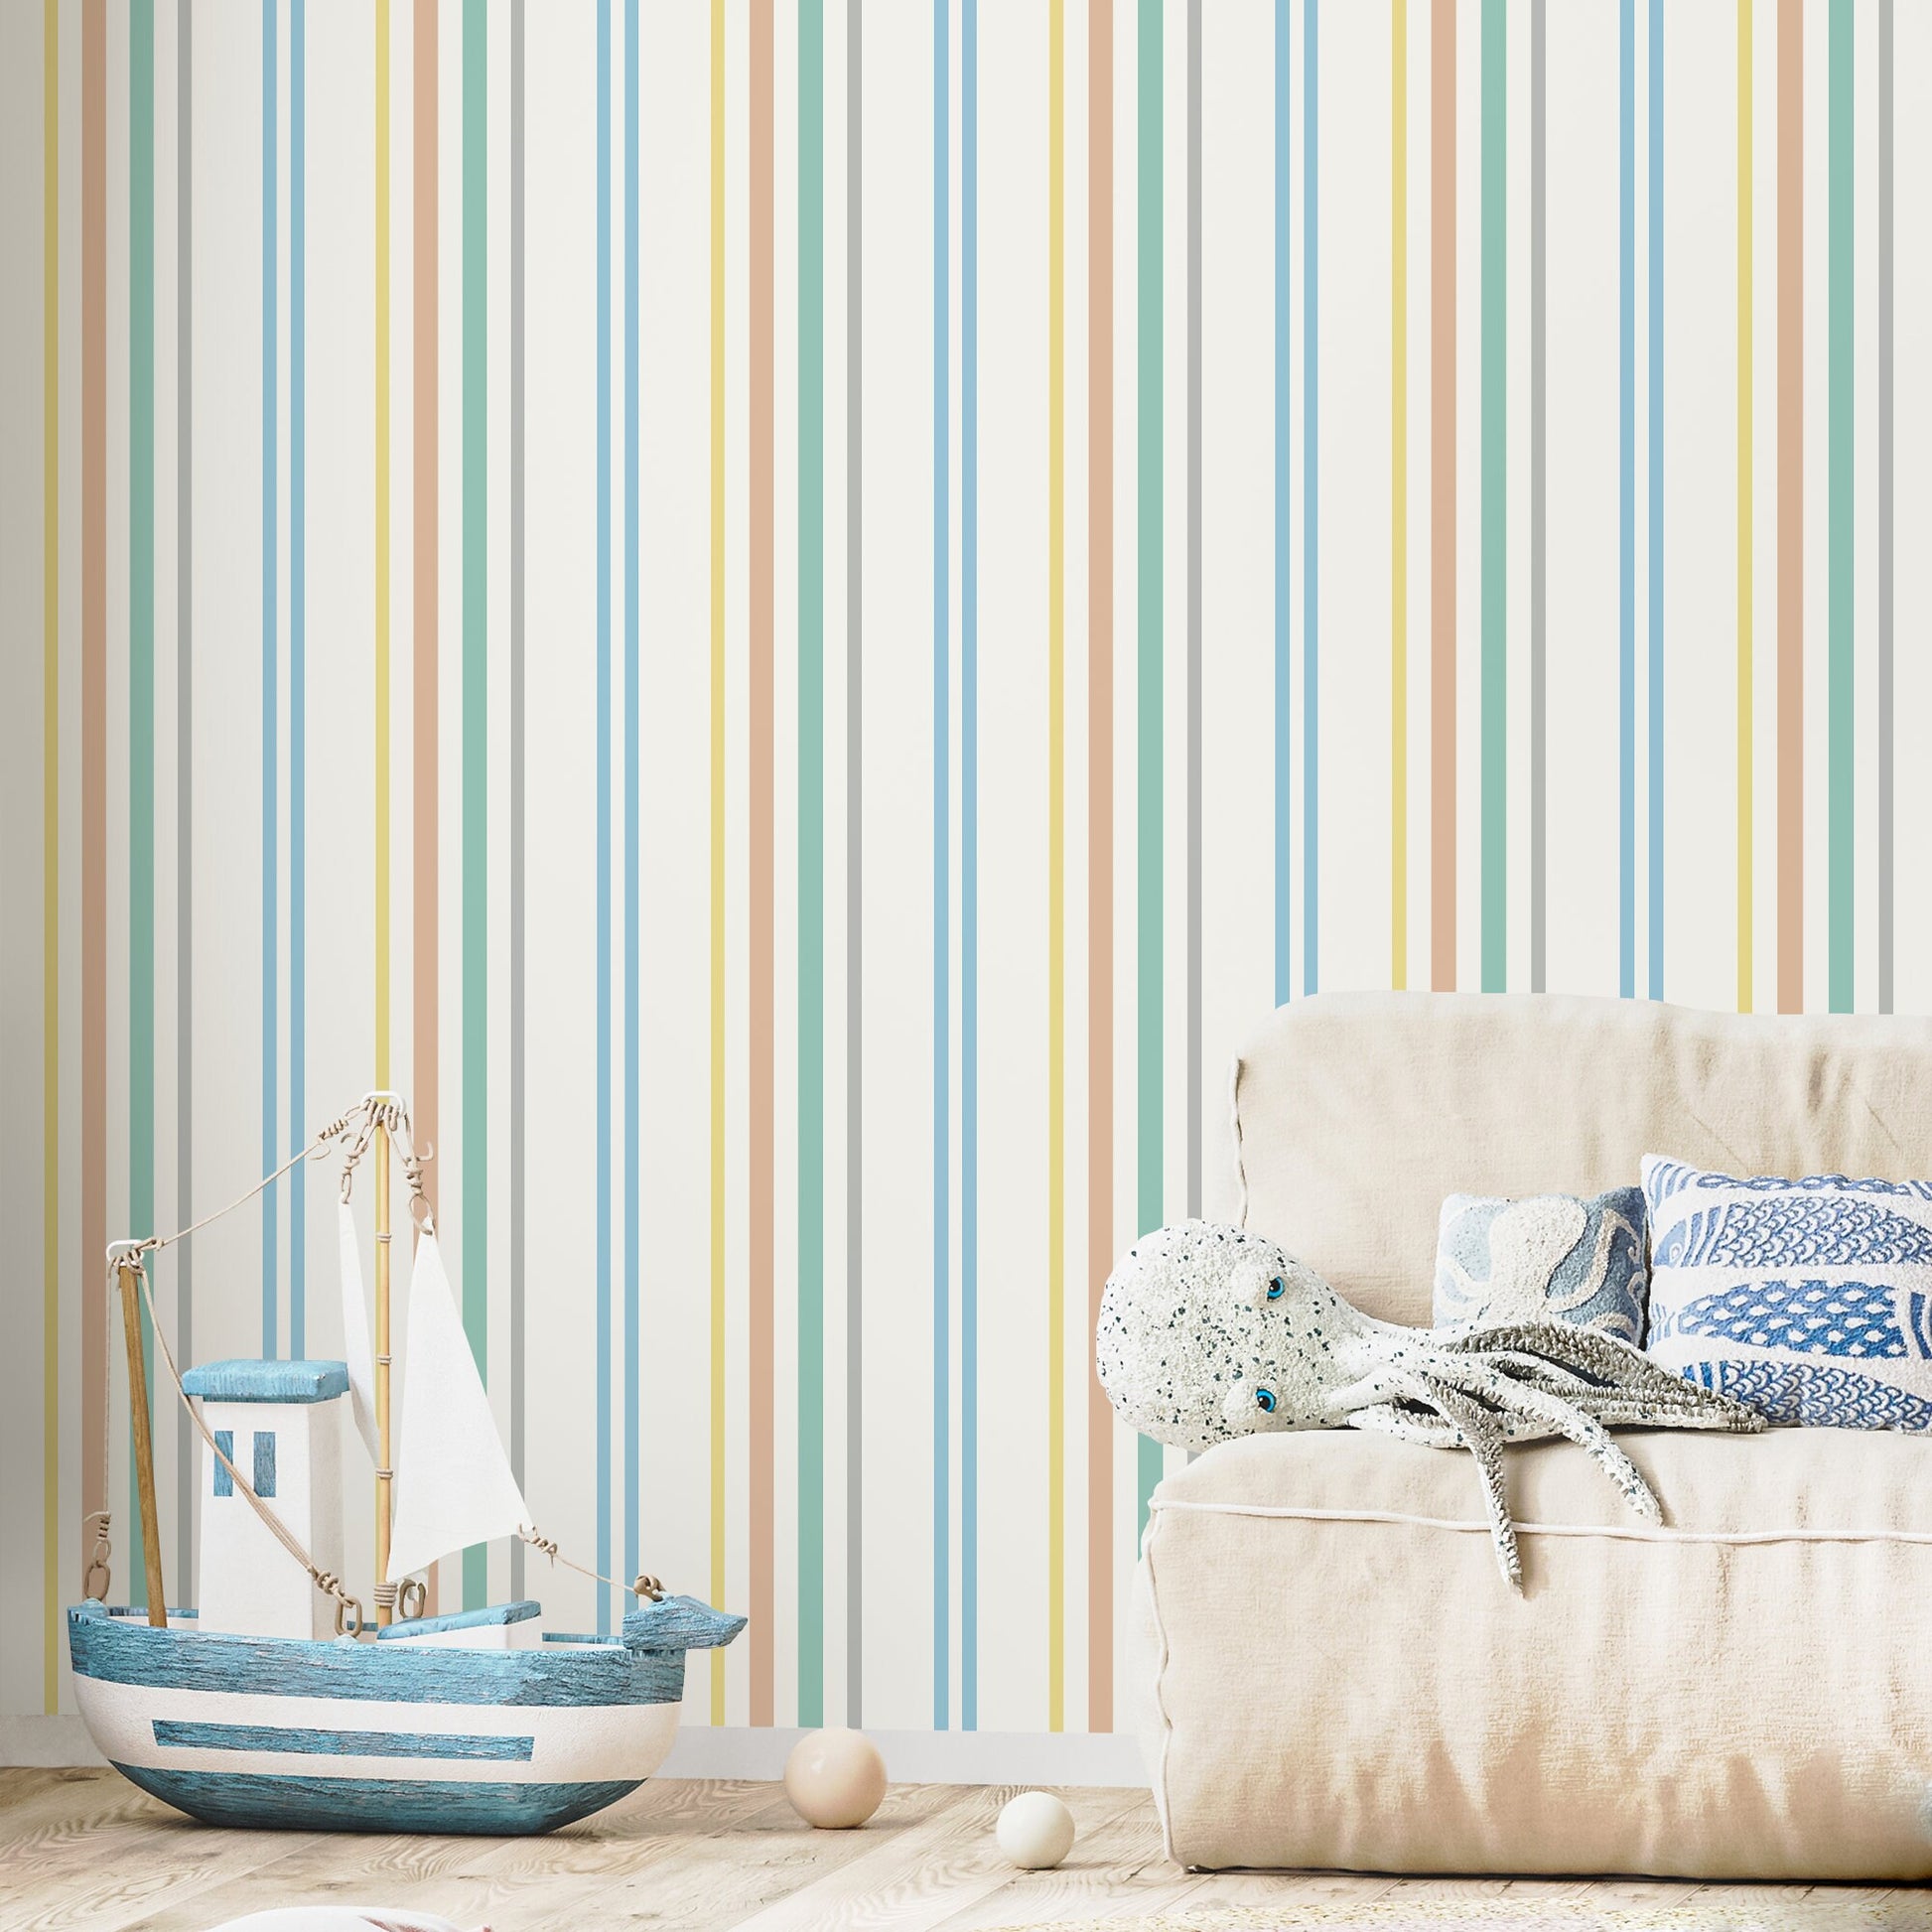 Colorful Striped Wallpaper Farmhouse Wallpaper Peel and Stick and Traditional Wallpaper - D786